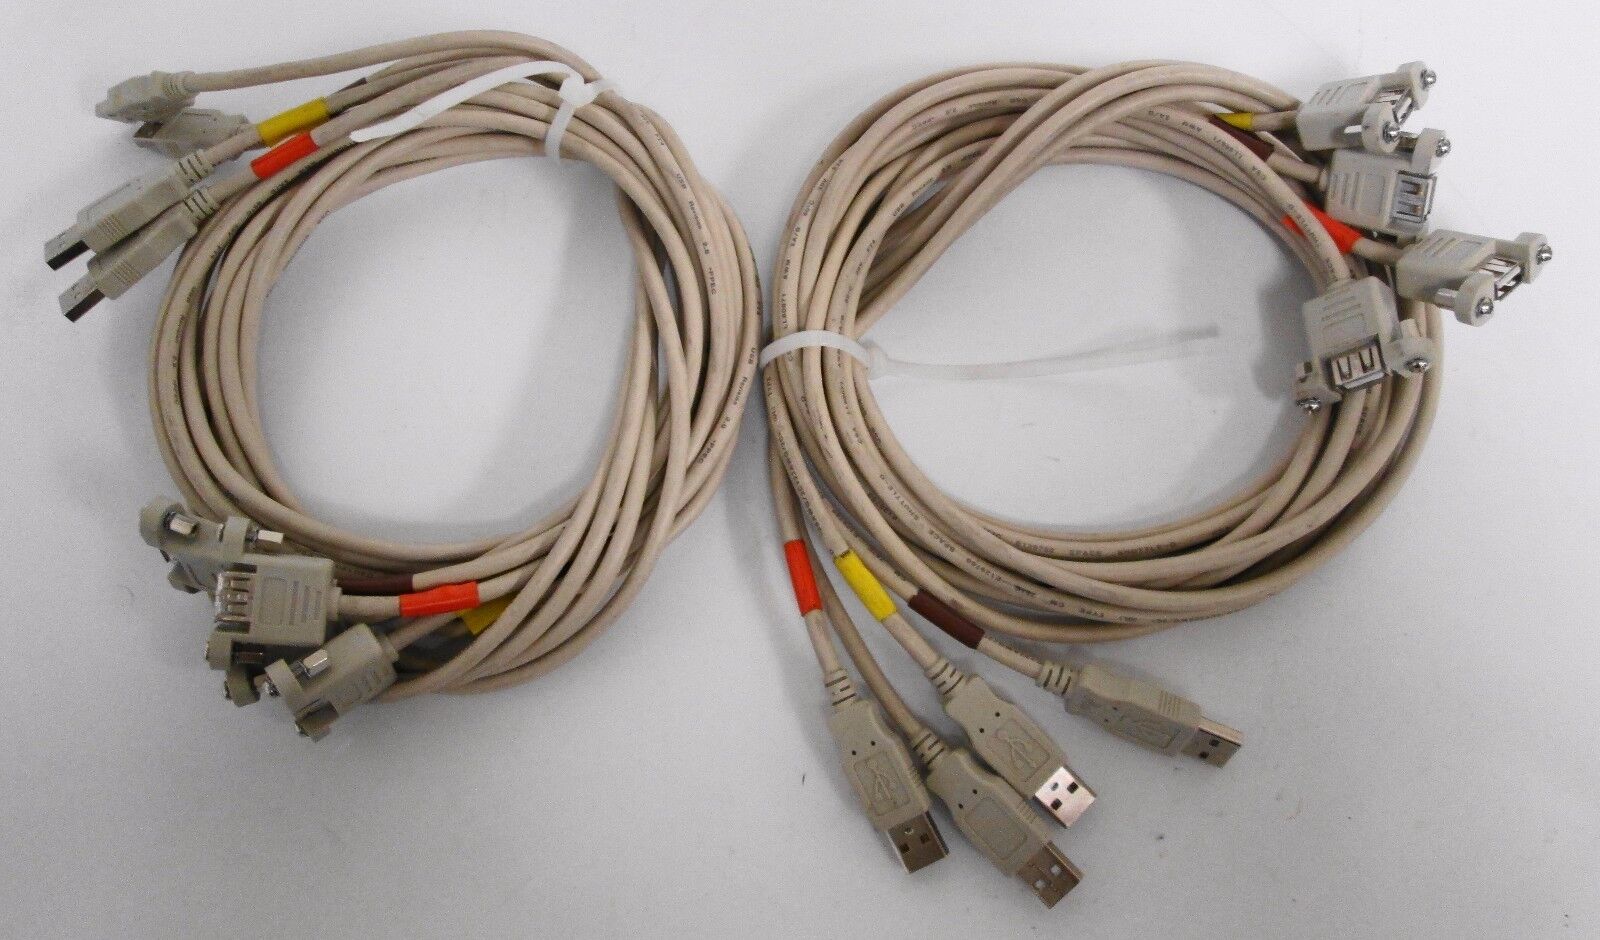 Space Shuttle-D E129760 USB Type A to Mounted USB Type A Cables (Lot of 8)